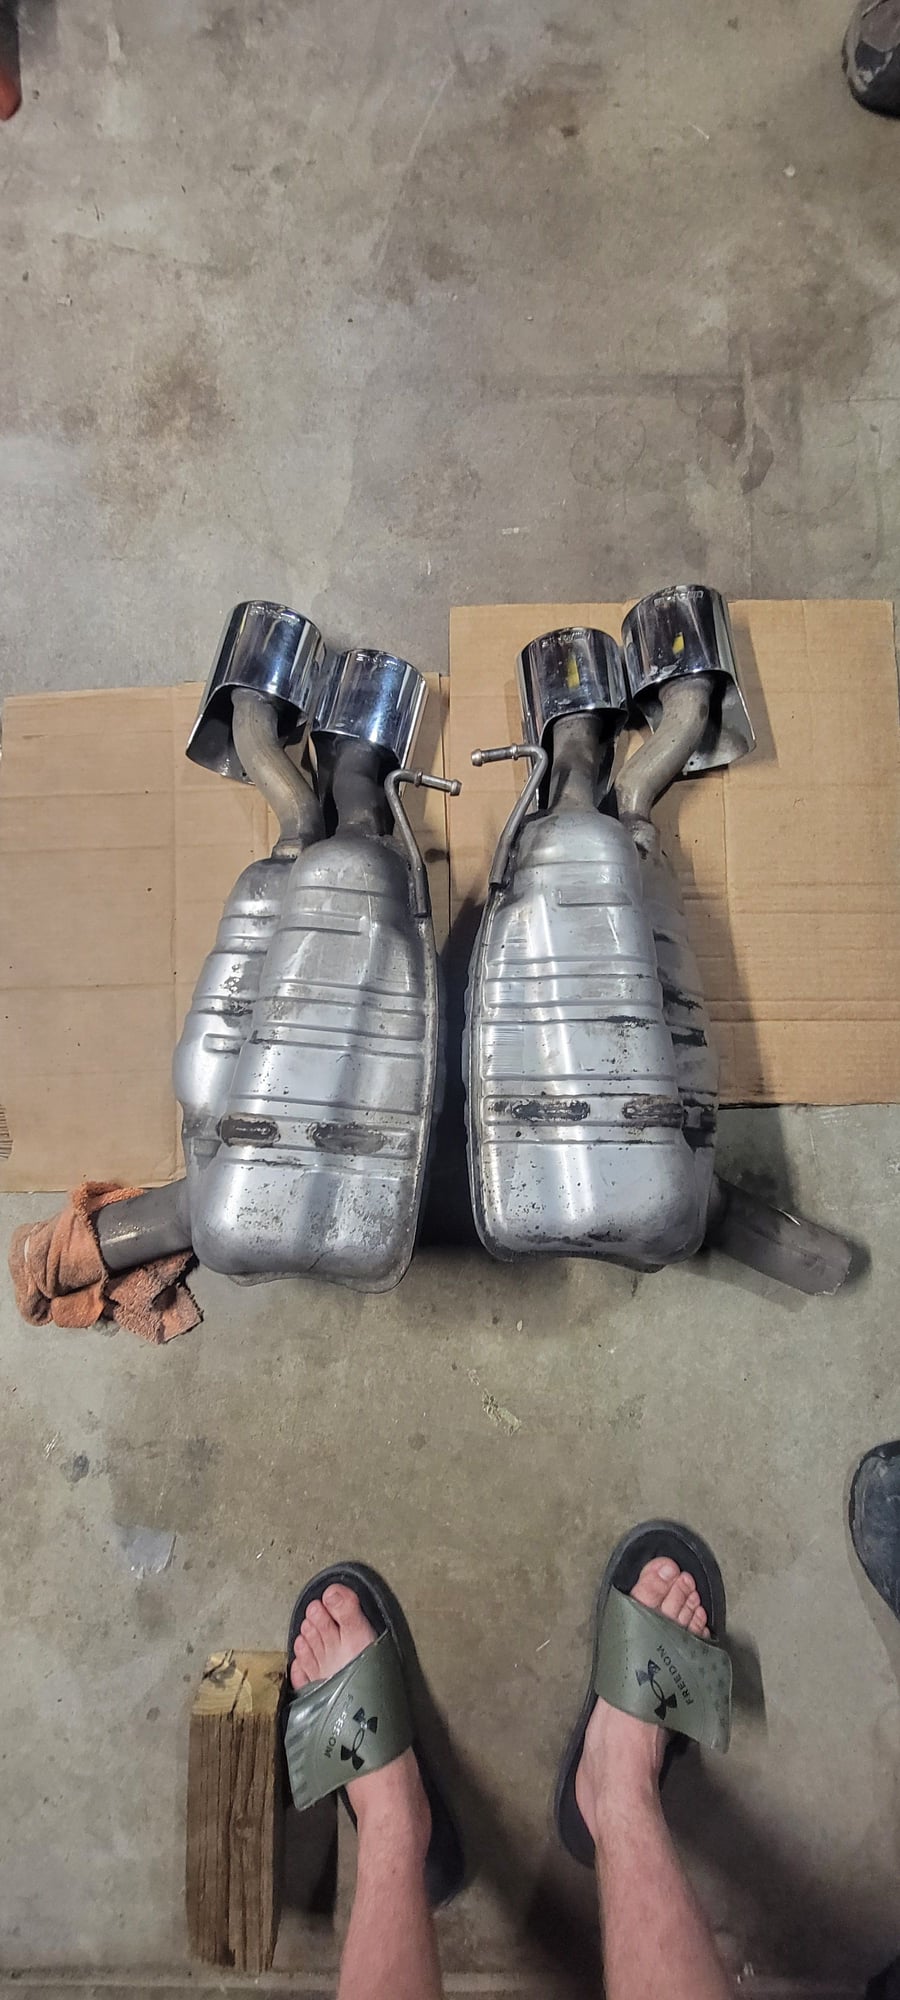 Engine - Exhaust - Looking to trade E63 mufflers plus cash for C63 mufflers - Used - 0  All Models - San Jose, CA 95120, United States